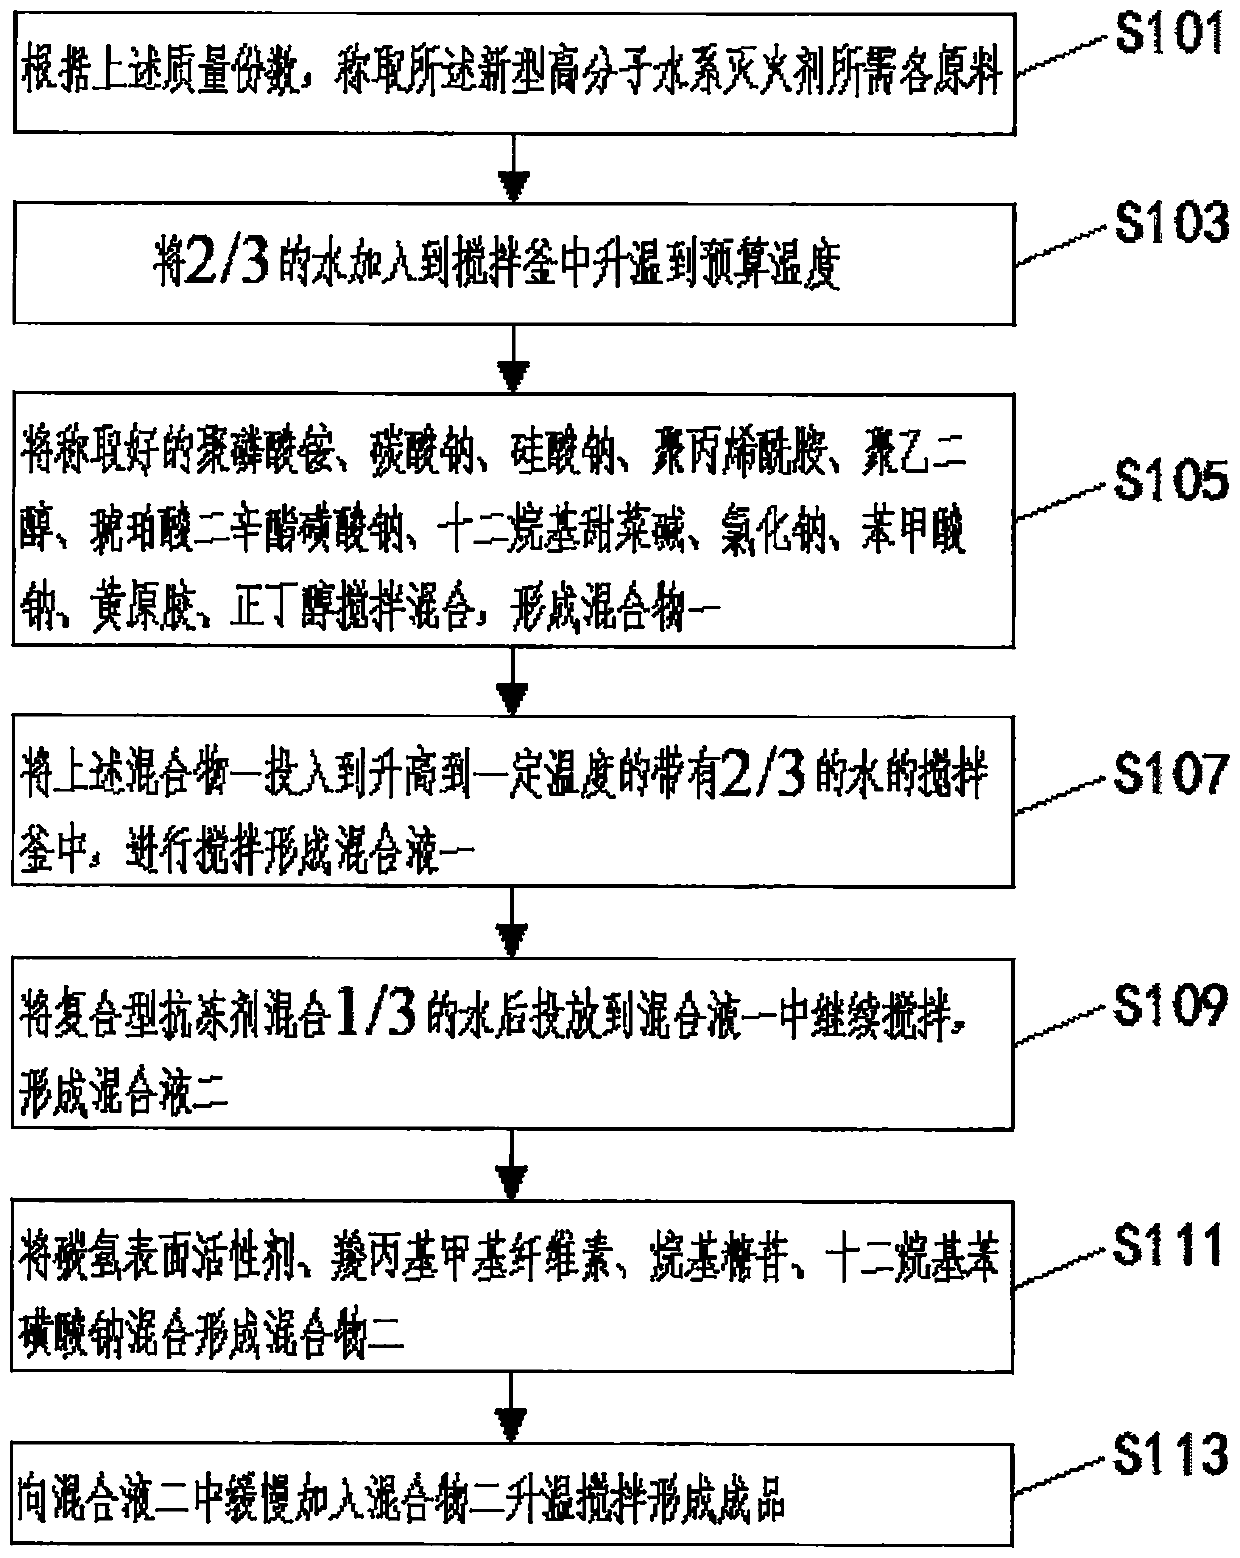 Novel polymer water-based fire extinguishing agent and preparation method thereof